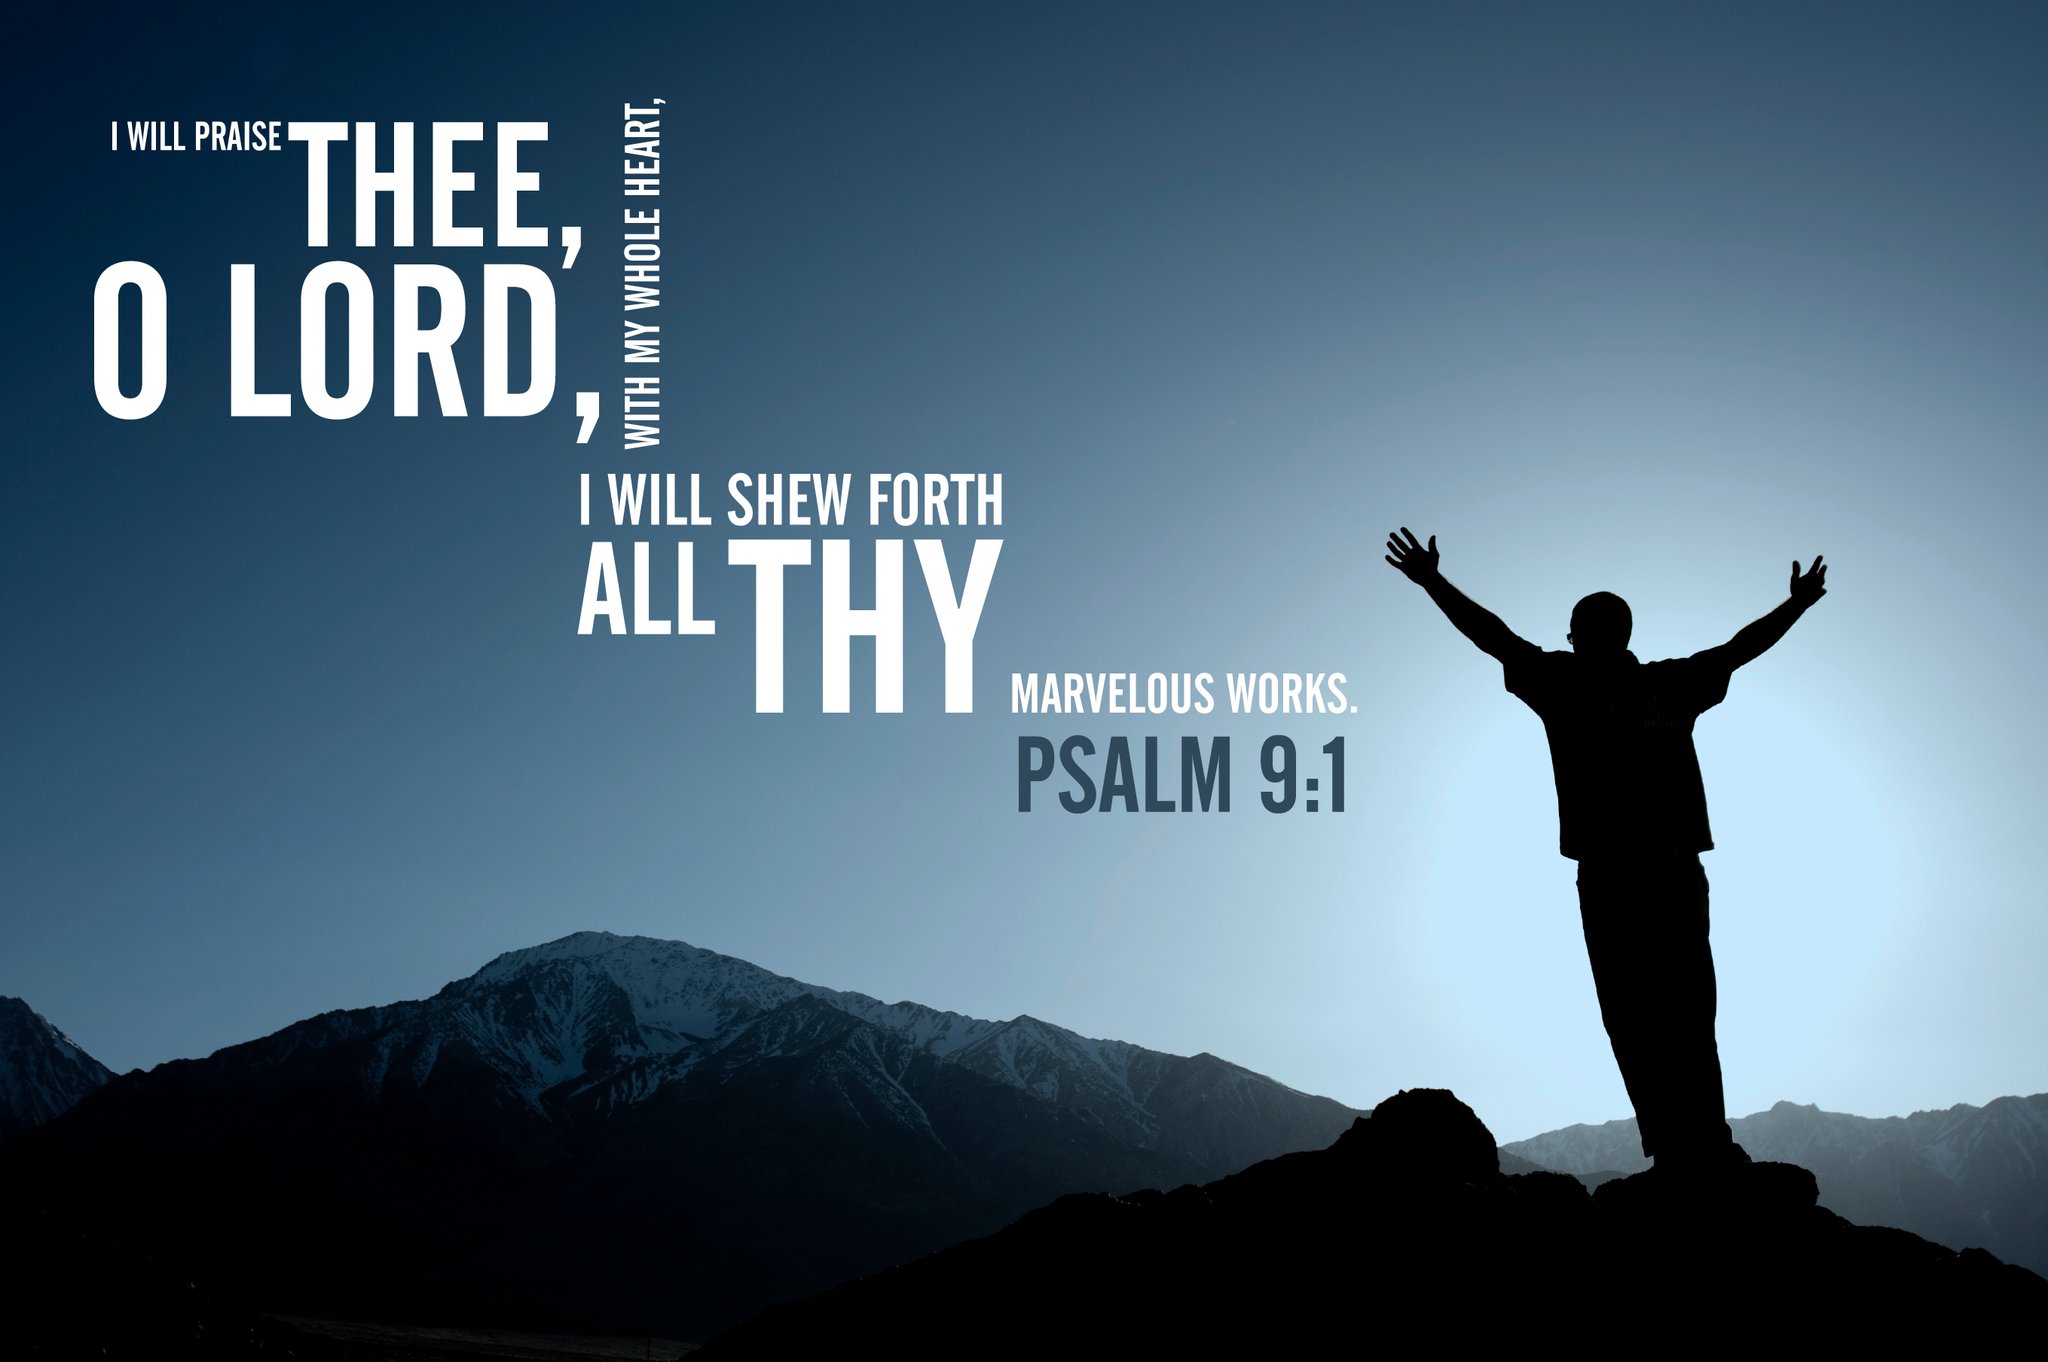  Praise The Lord Wallpaper   Christian Wallpapers and Backgrounds